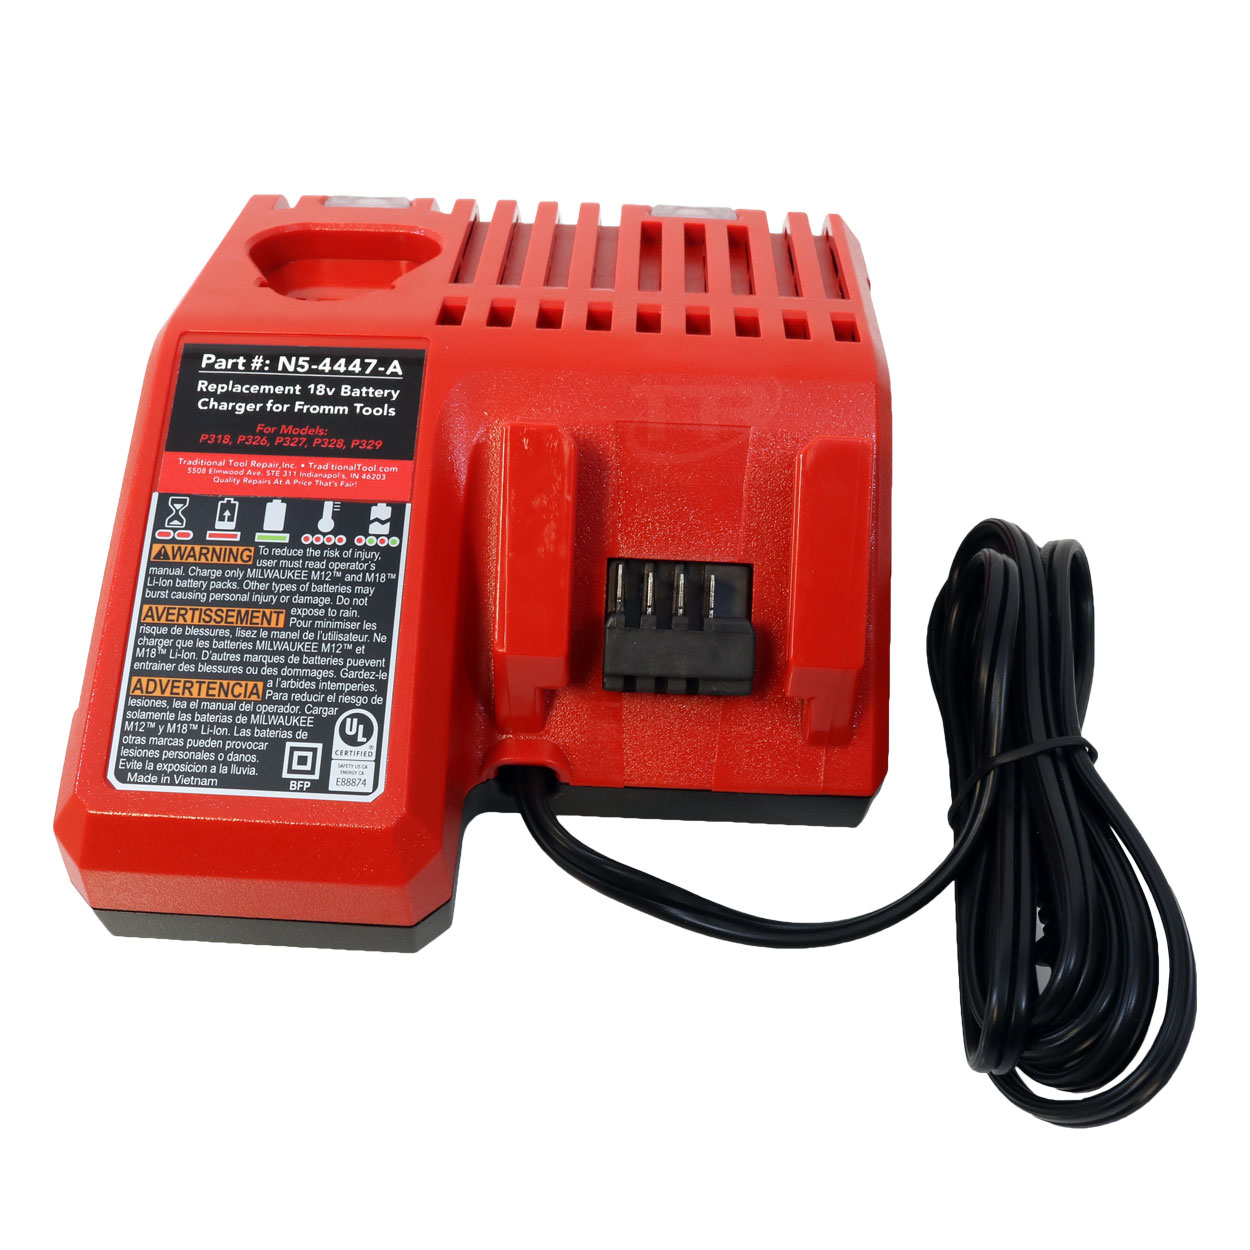 Black and Decker 18v Battery Charger Replacement 